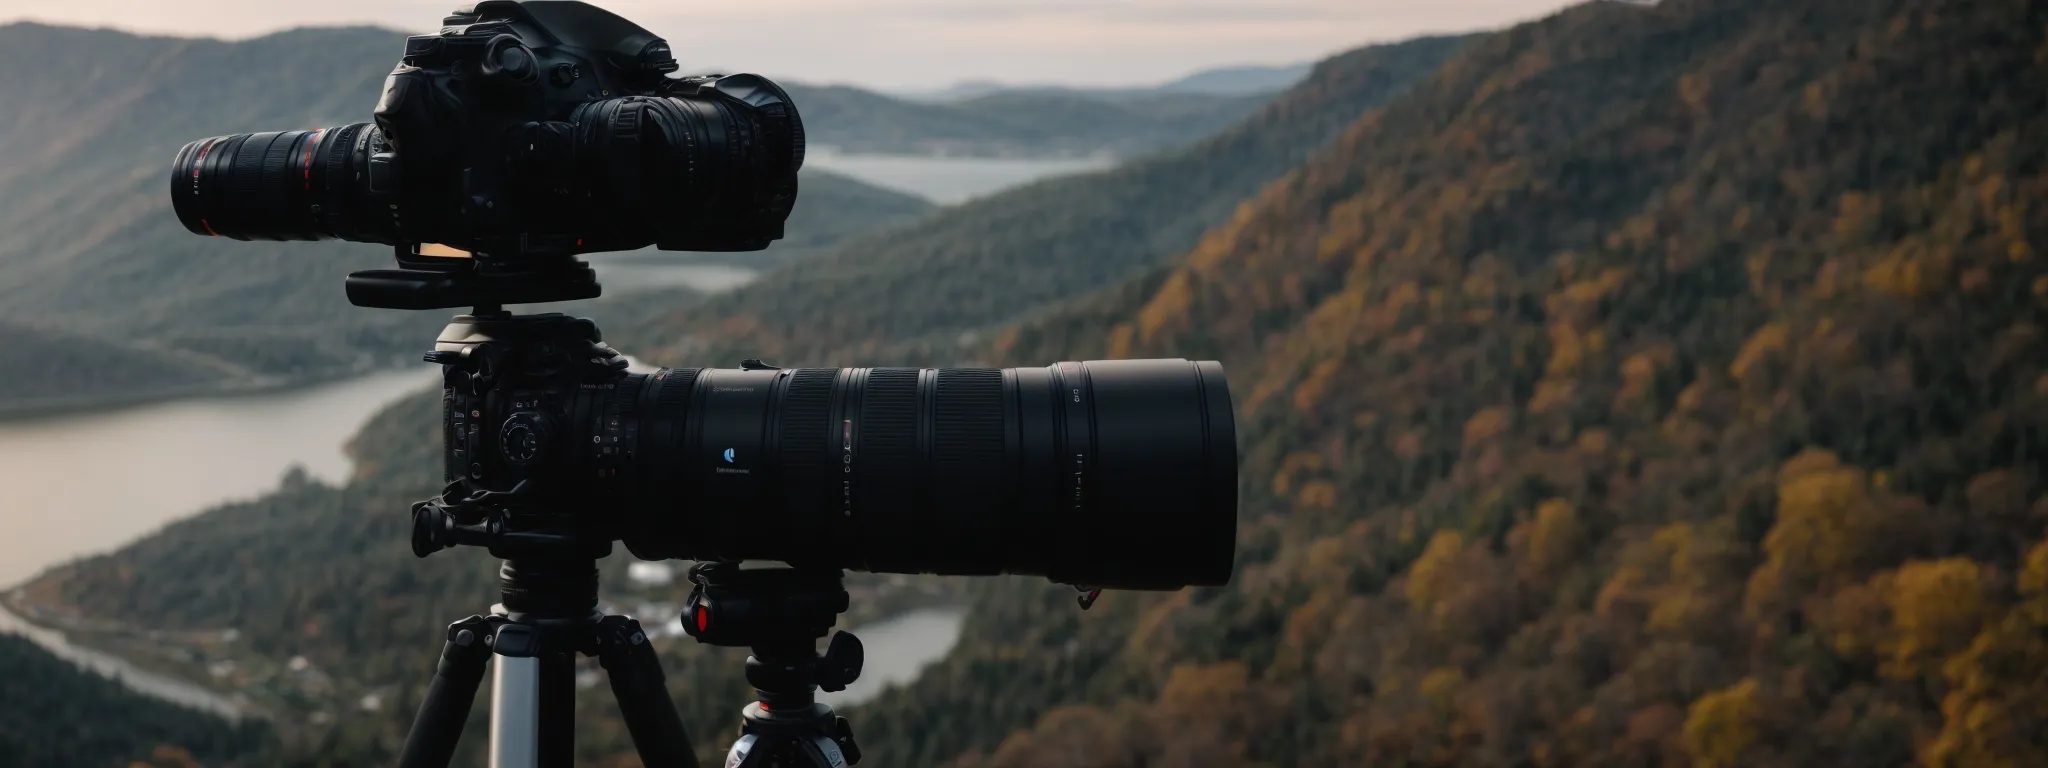 a camera on a tripod overlooking a scenic vista, emblematic of a photographer's quest for online visibility.